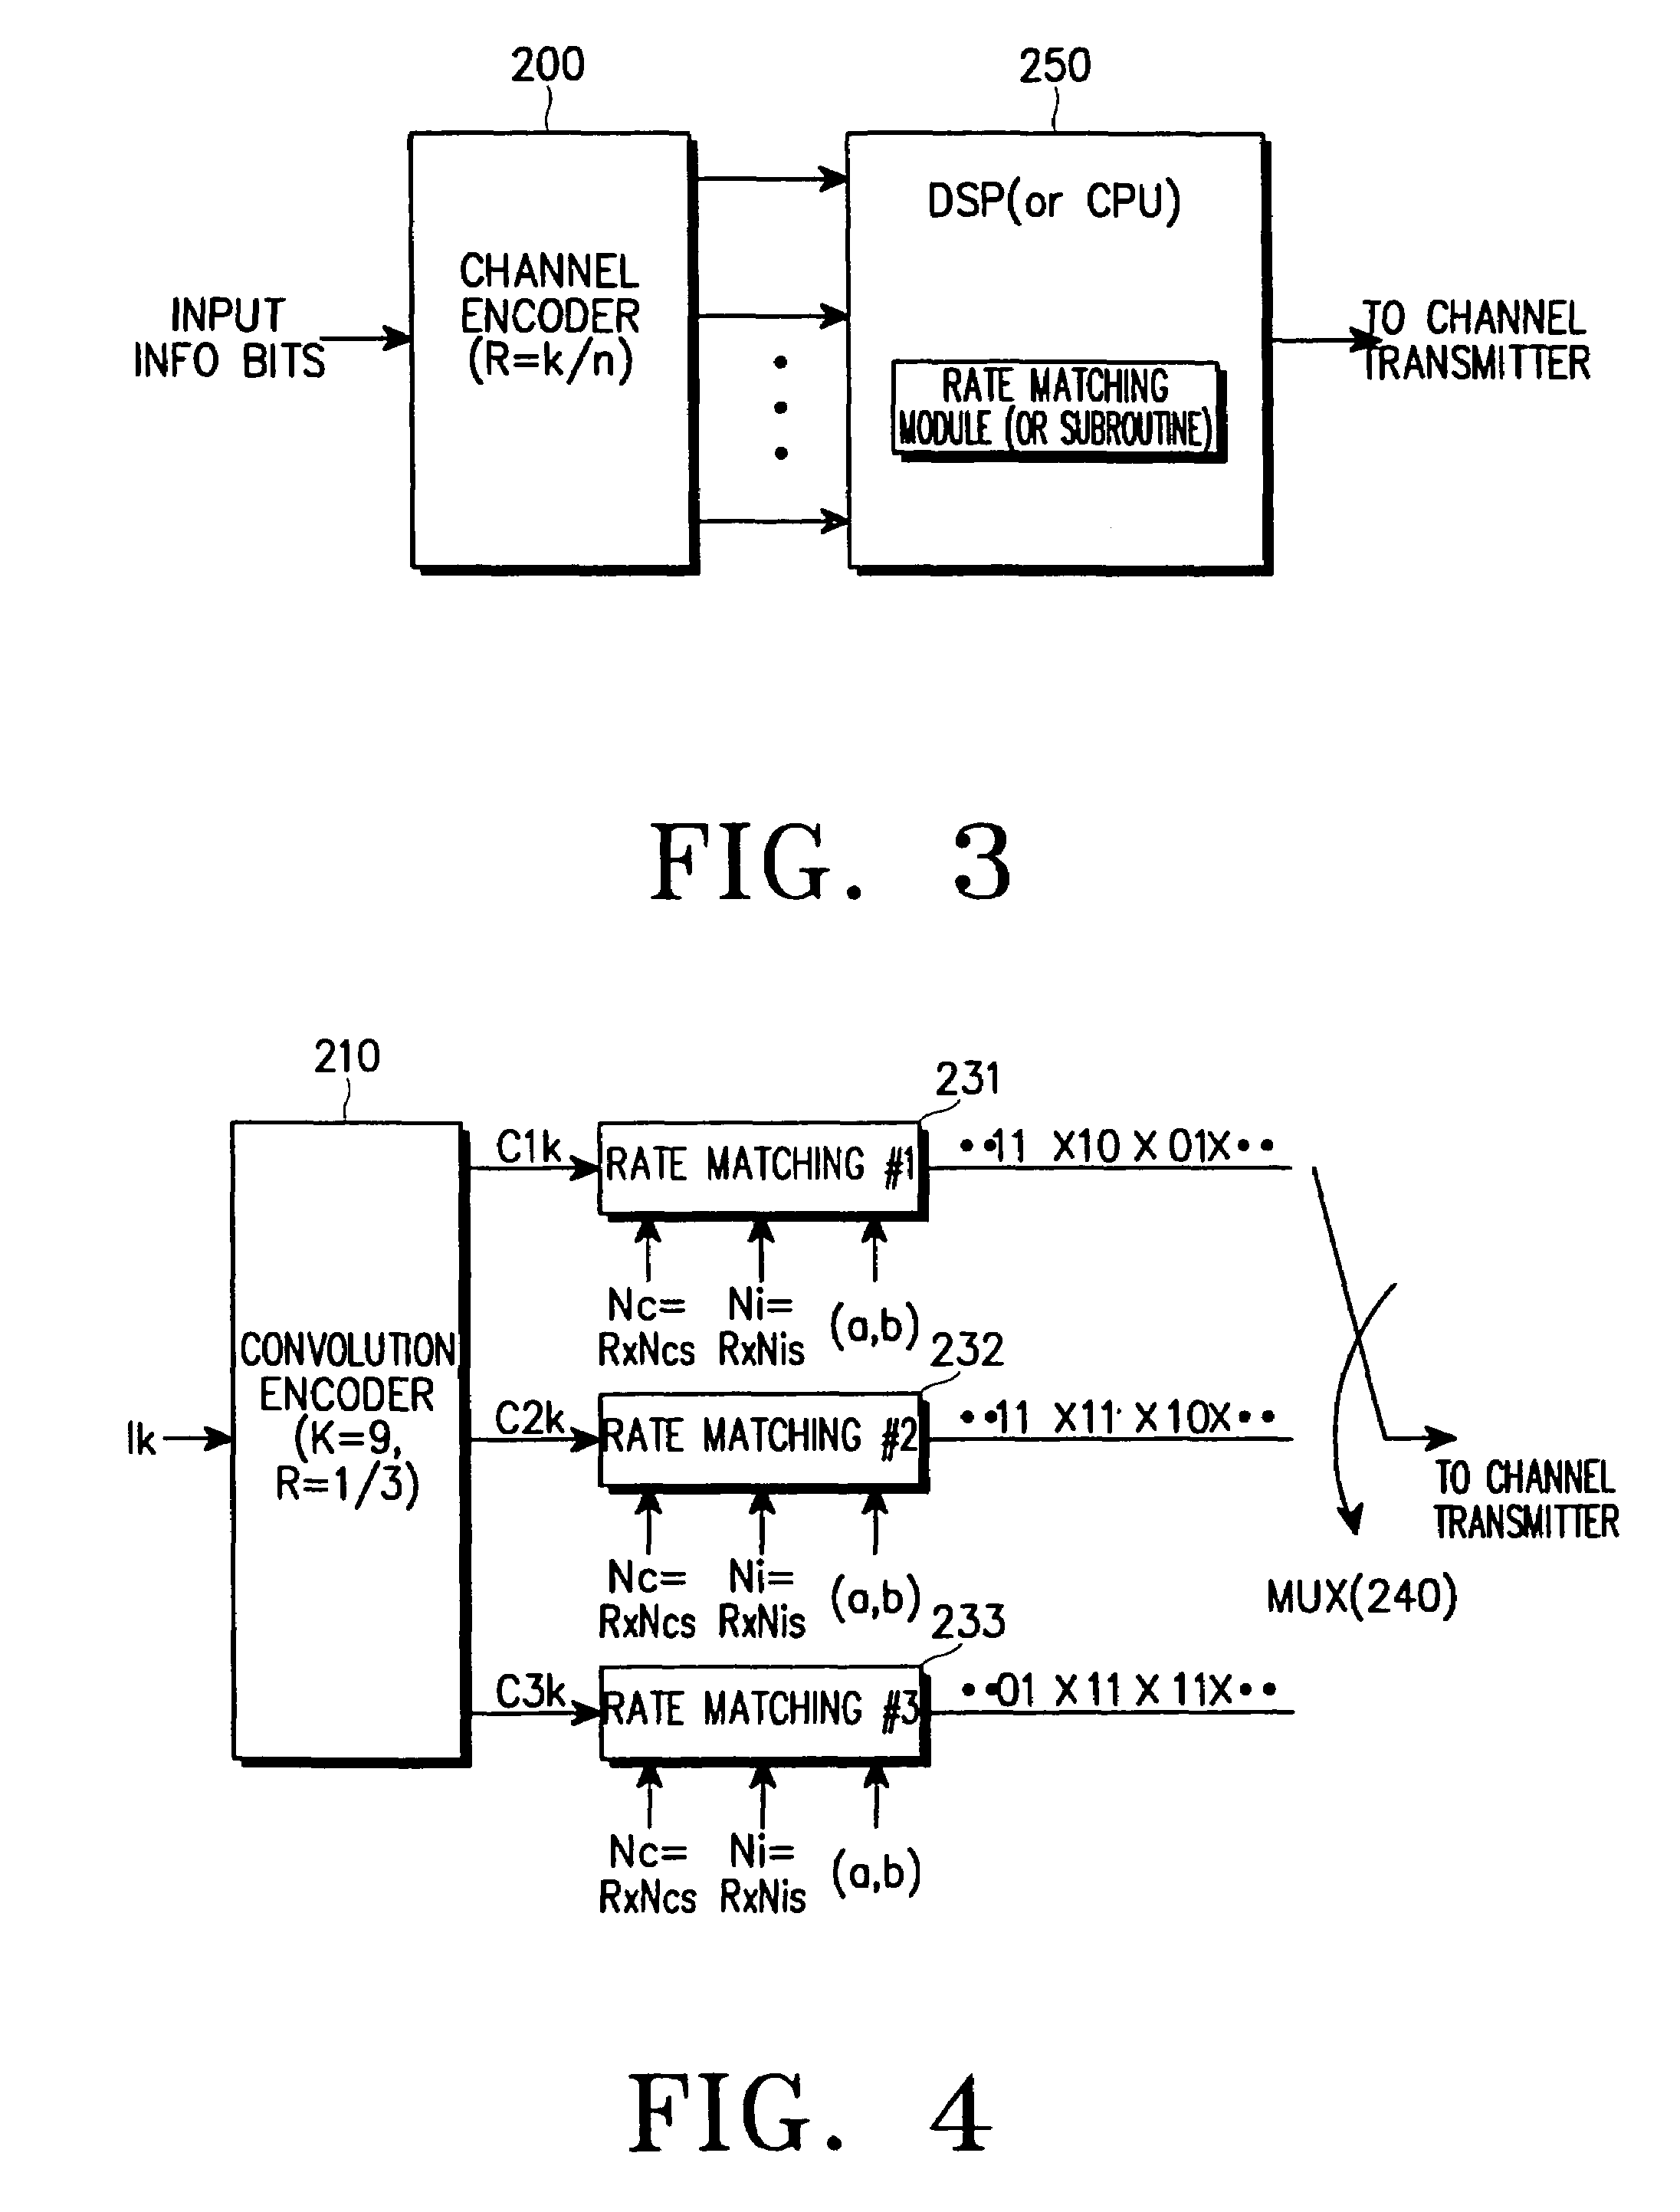 Rate matching device and method for a data communication system